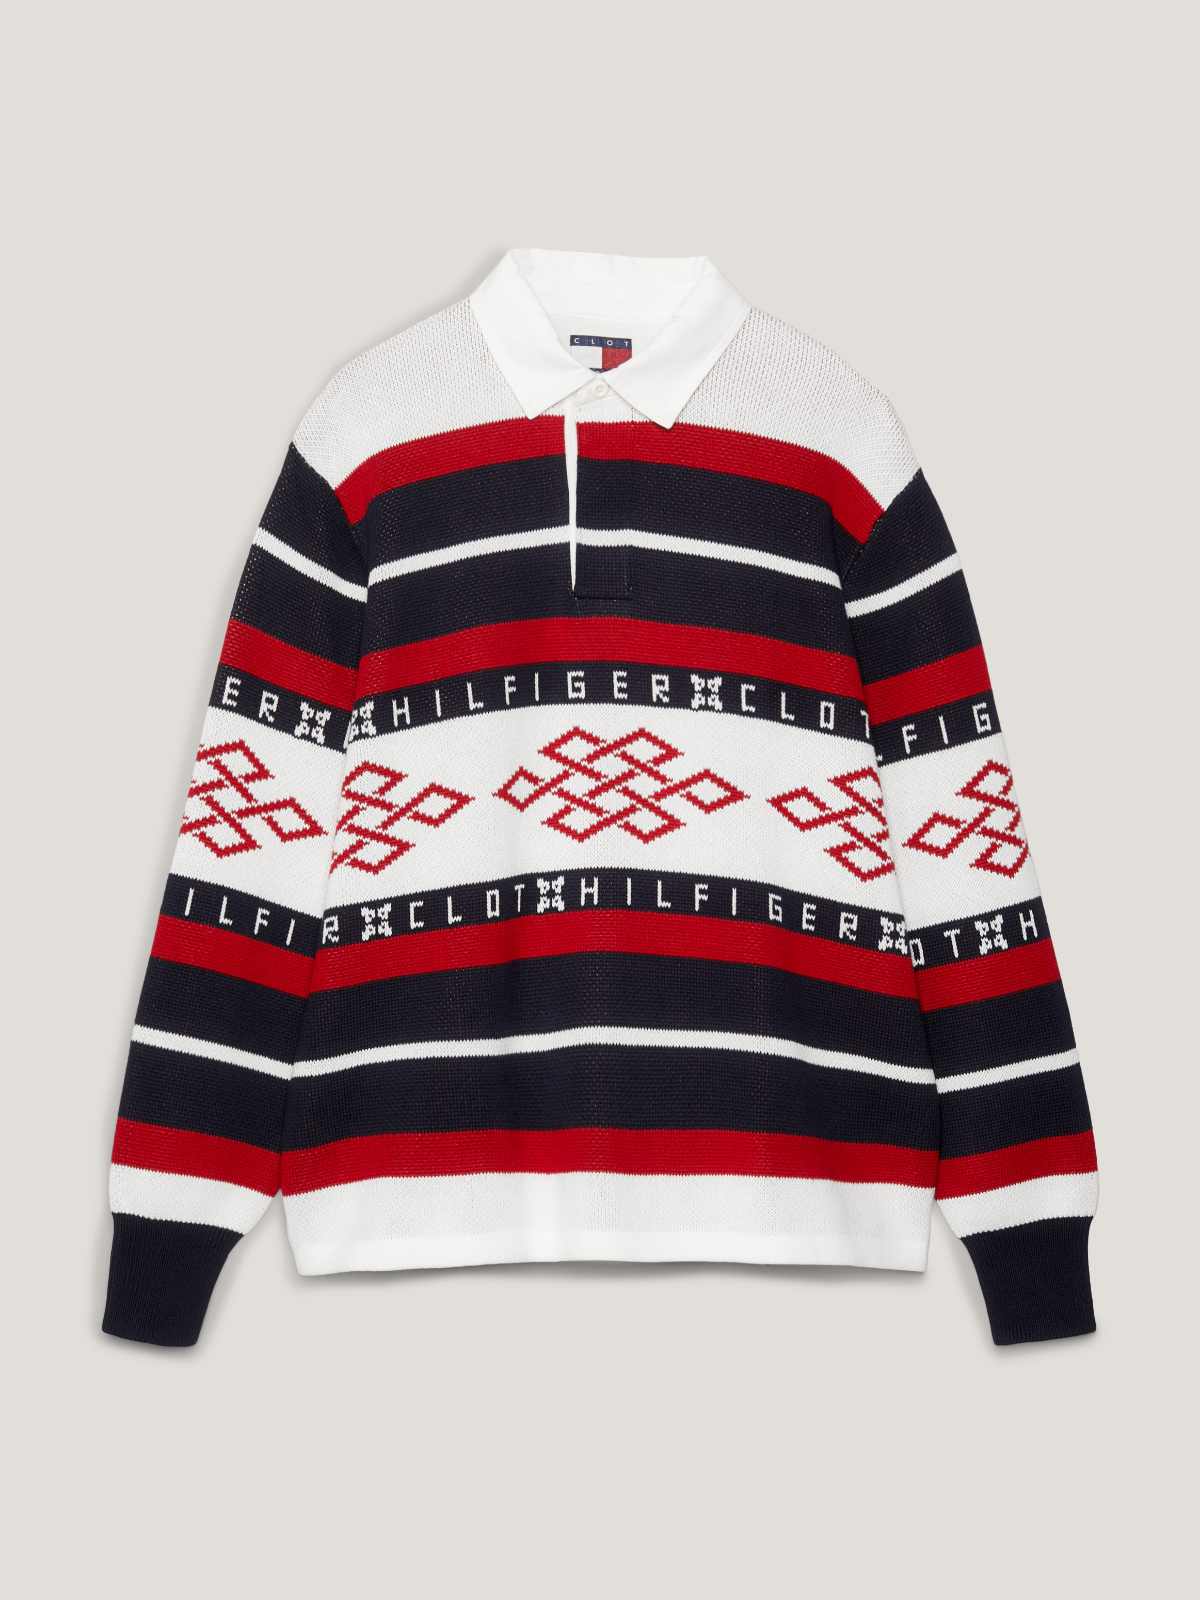 TOMMY HILFIGER AND CLOT ANNOUNCE COLLECTION CELEBRATING THE YEAR